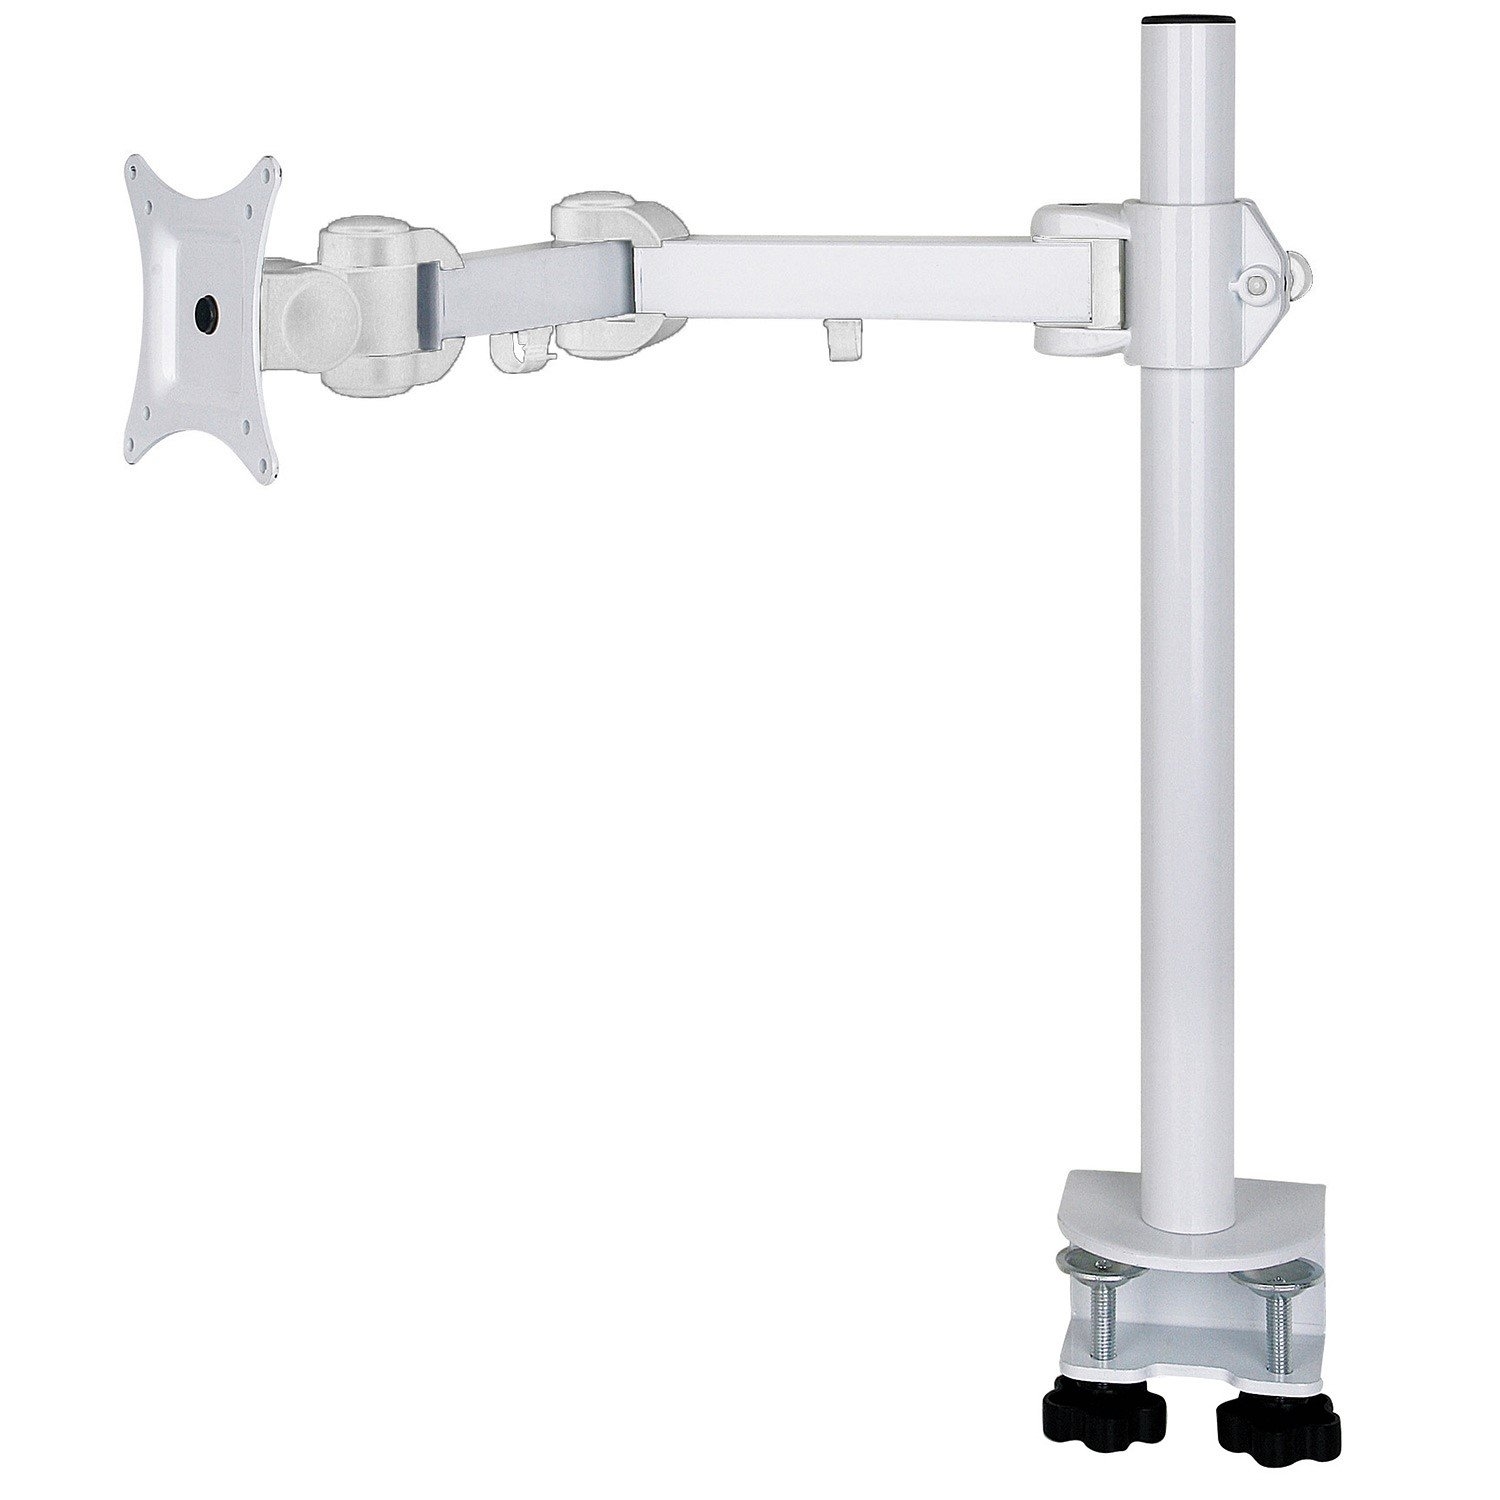 Pole Mounted Monitor Arm For Single Screen – WHITE – Up Standesk